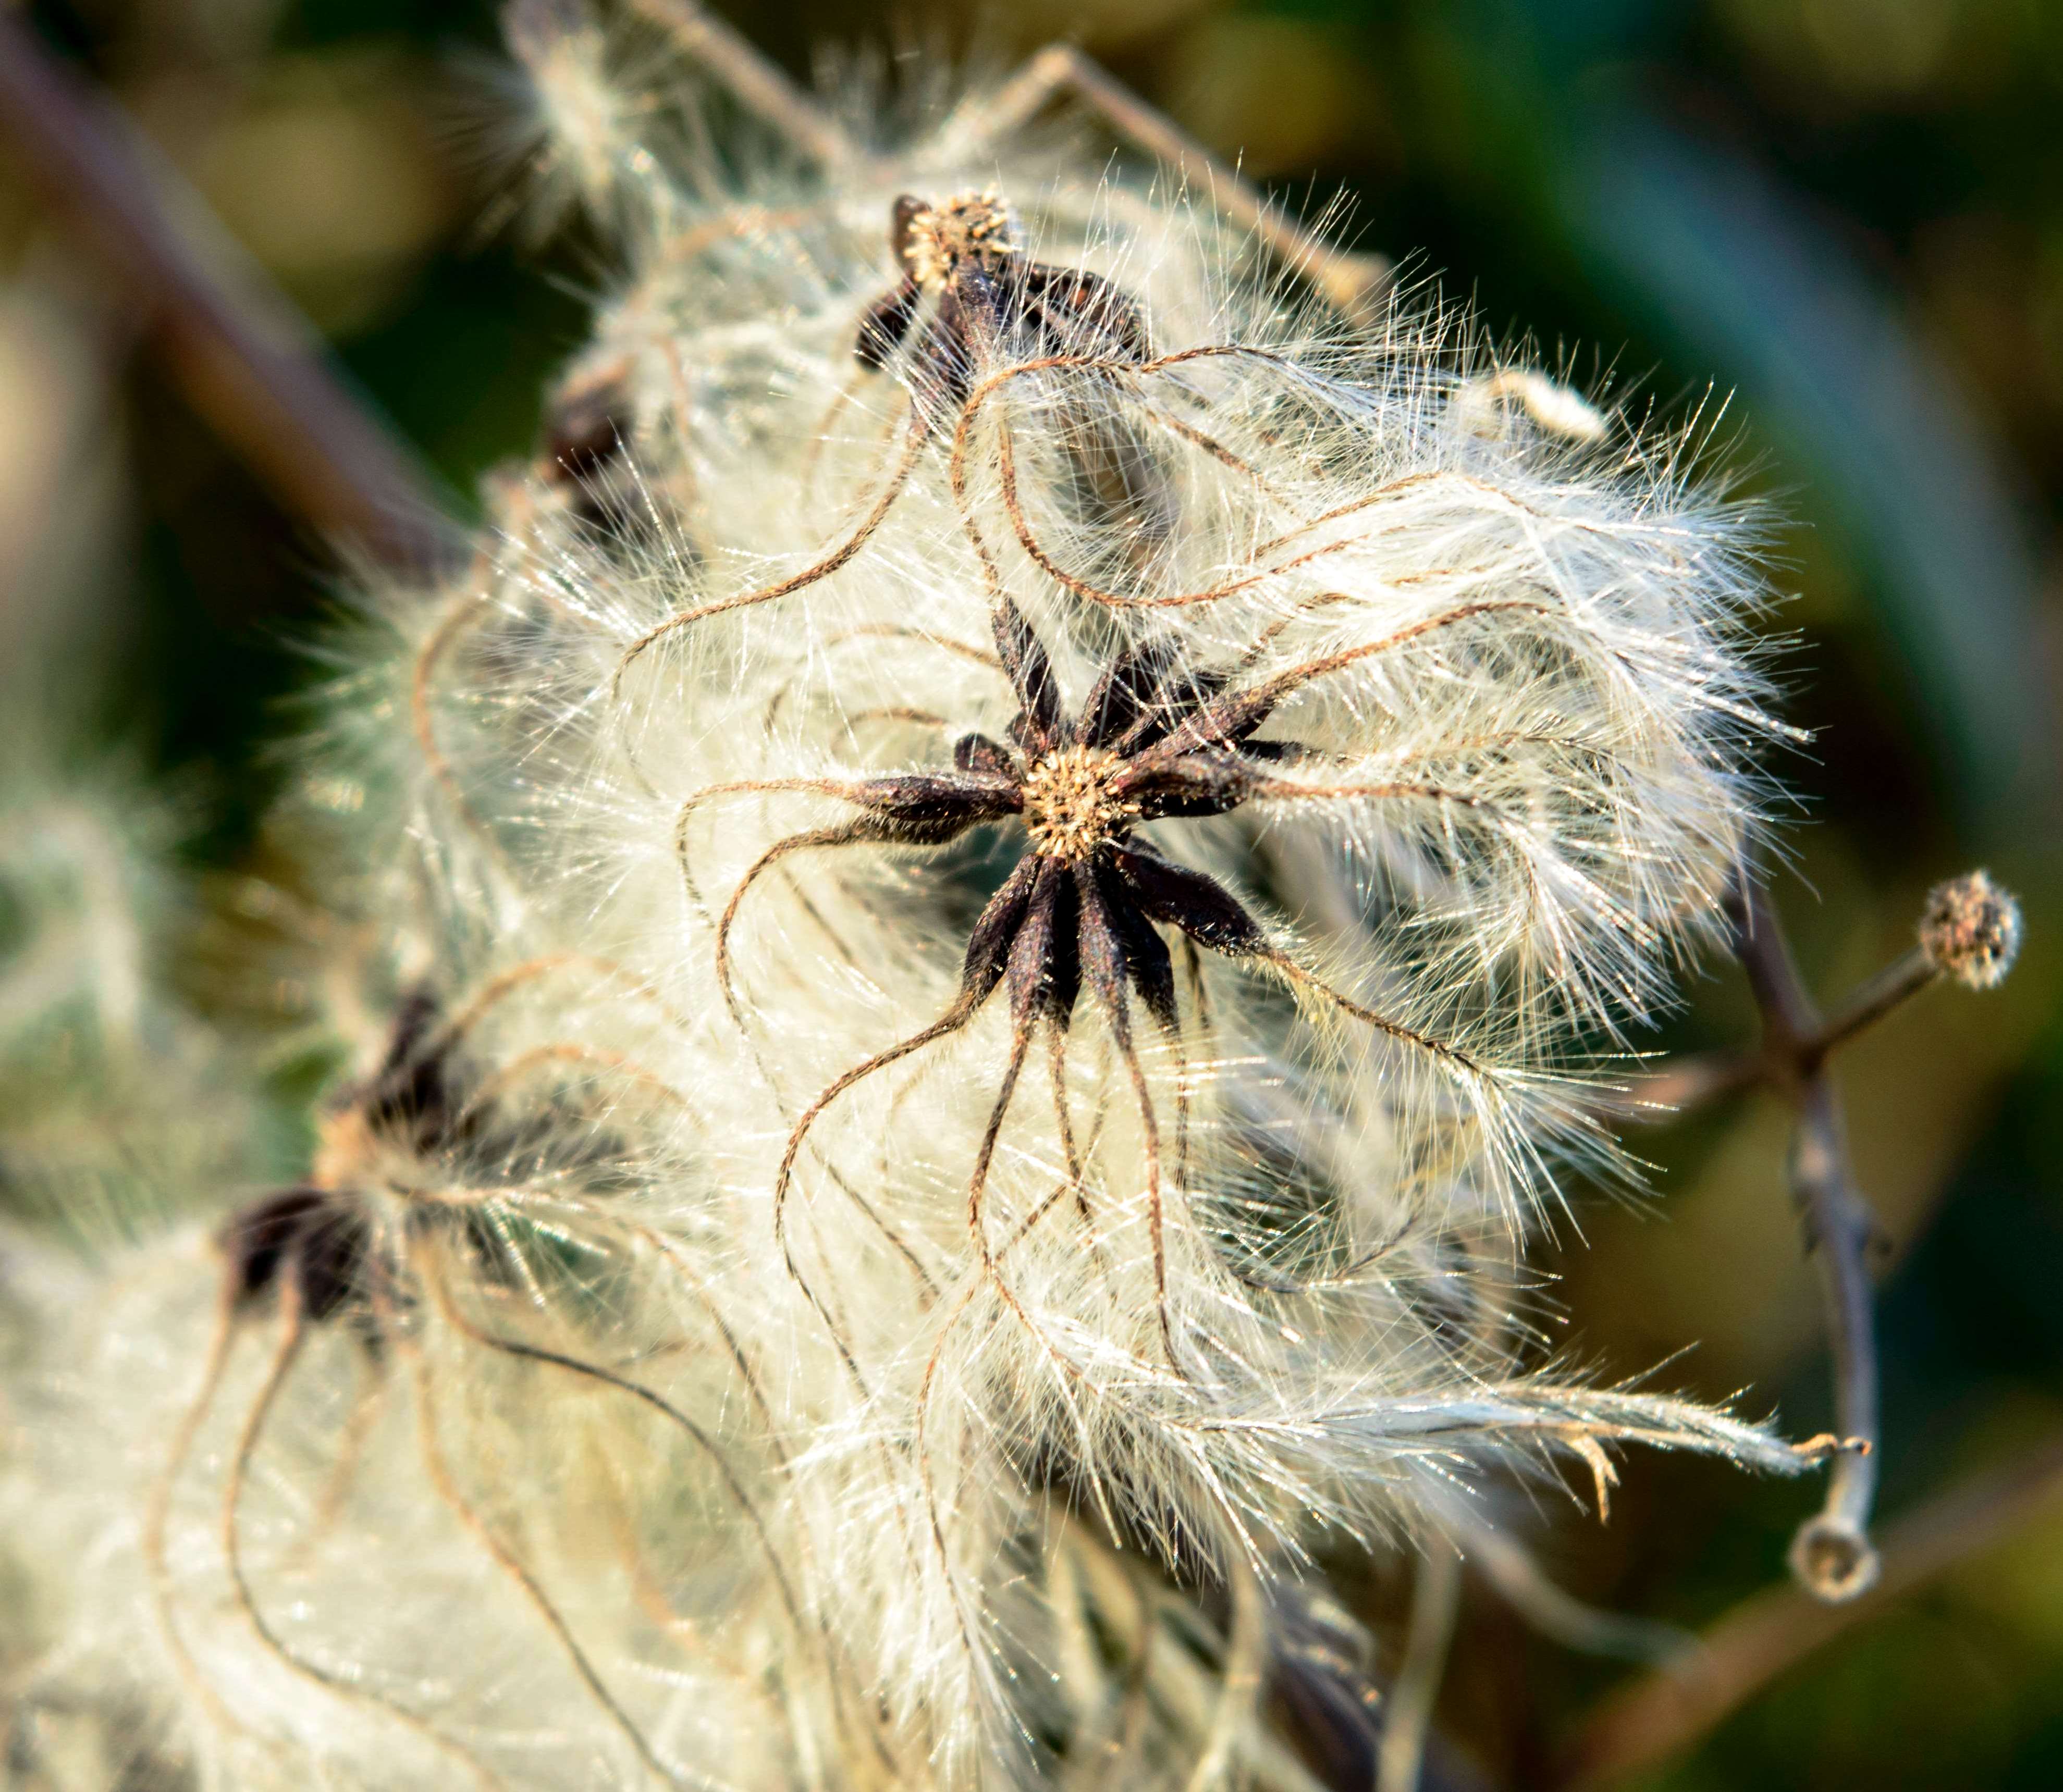 Clematis Seed Head